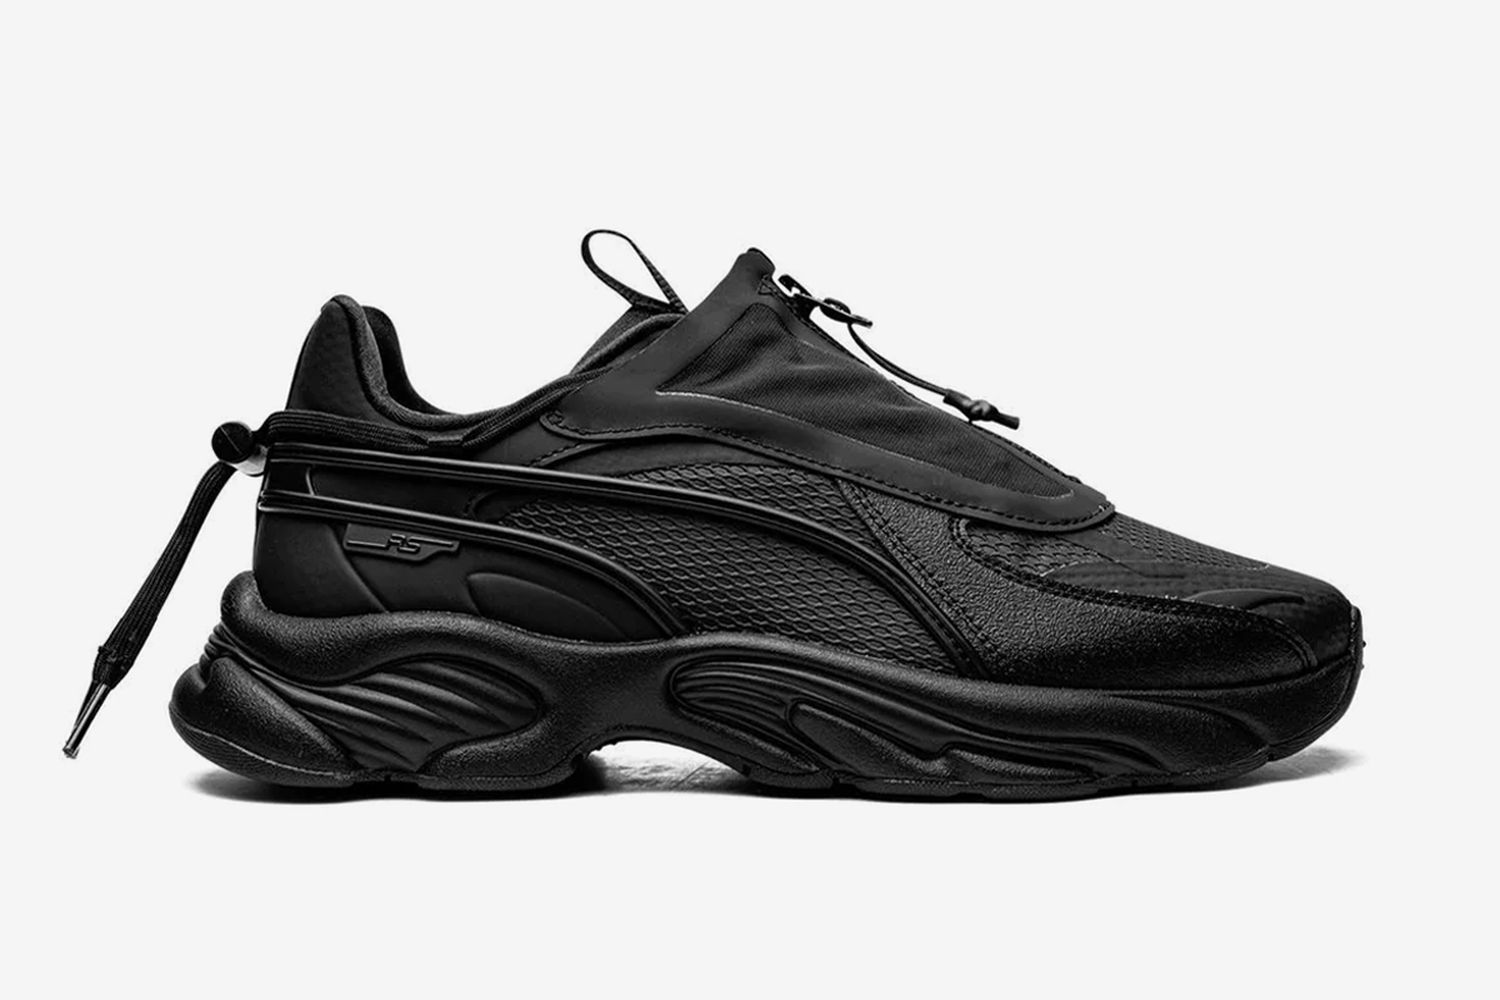 Are Puma Shoes Comfortable?